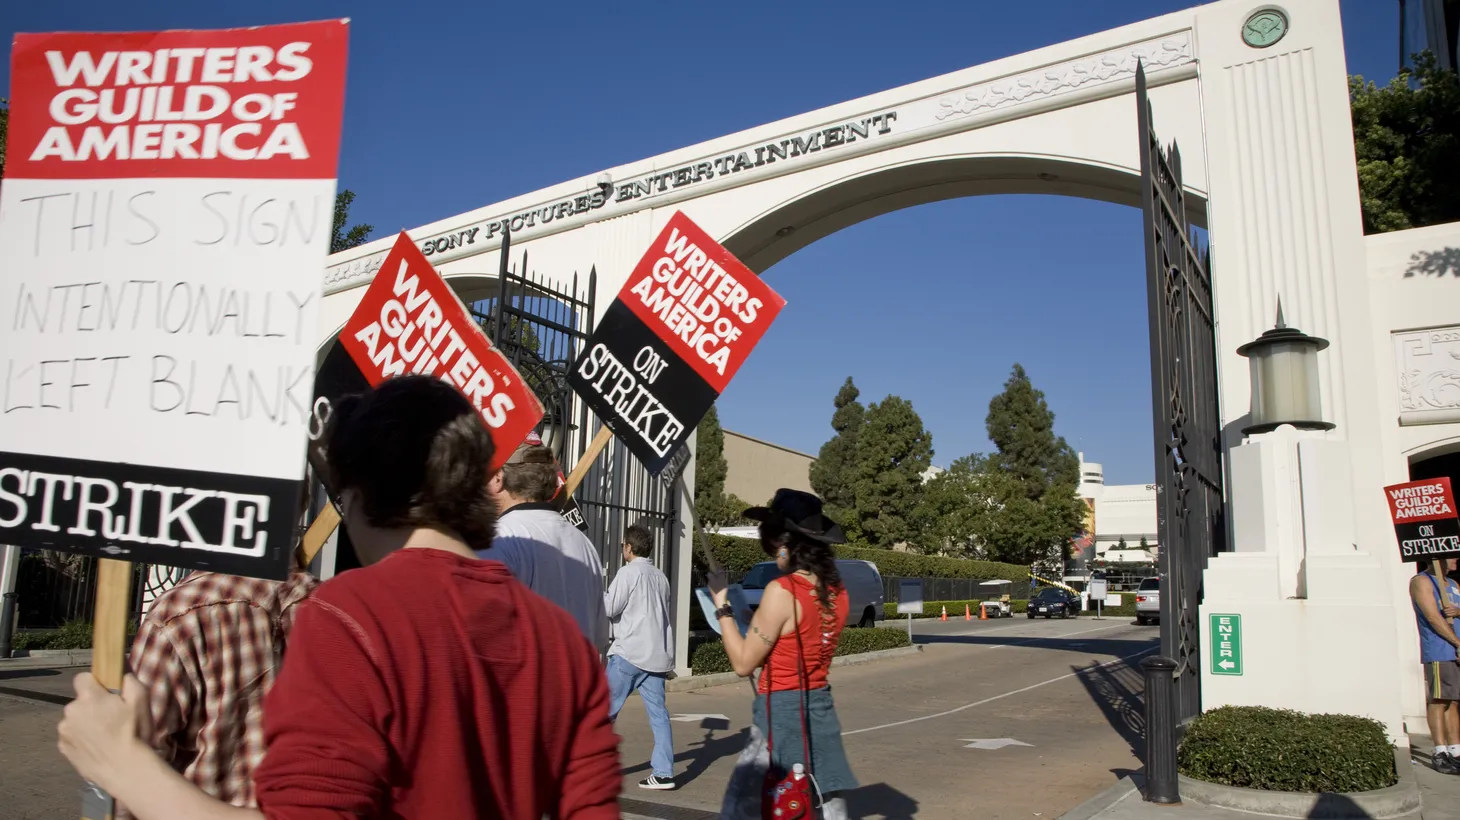 Members of the Writers Guild of America picket at the entrance of Sony Pictures Entertainment studio in Culver City, on December 3, 2007.